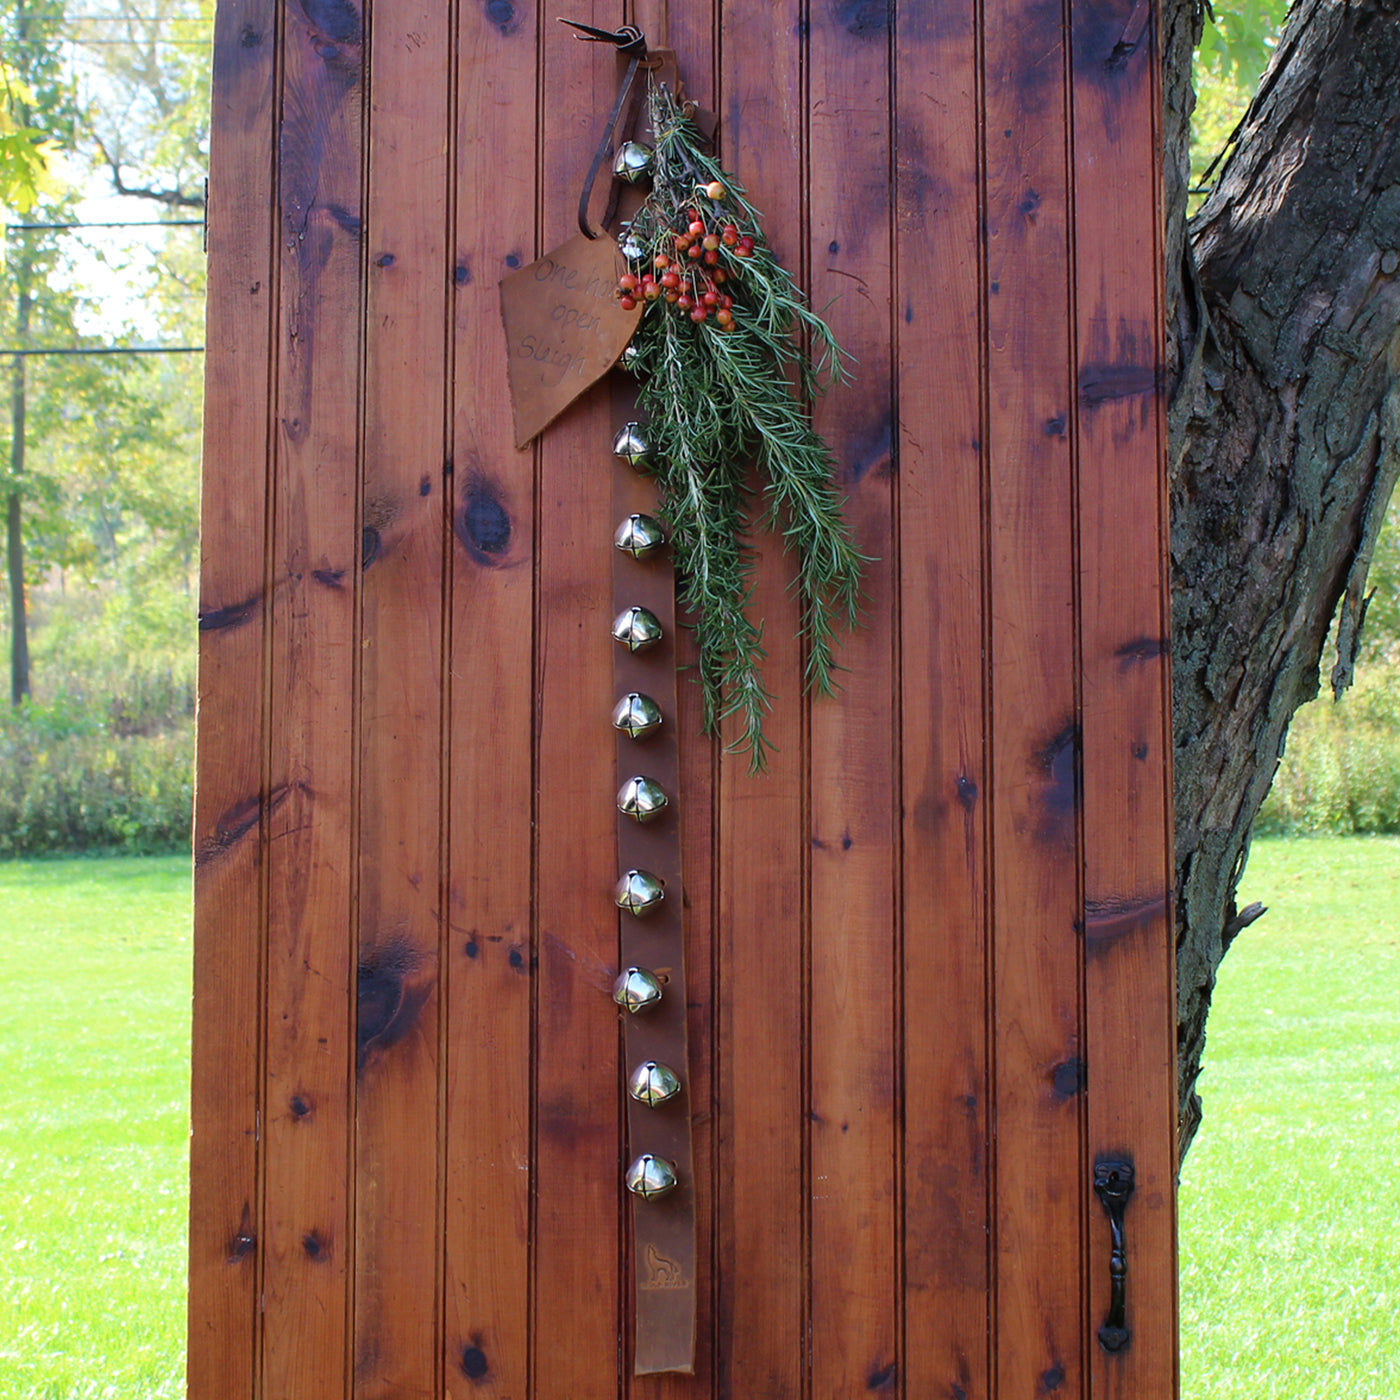 A leather strap with jingle bells down the front hangs with a mistletoe on a wooden backdrop.